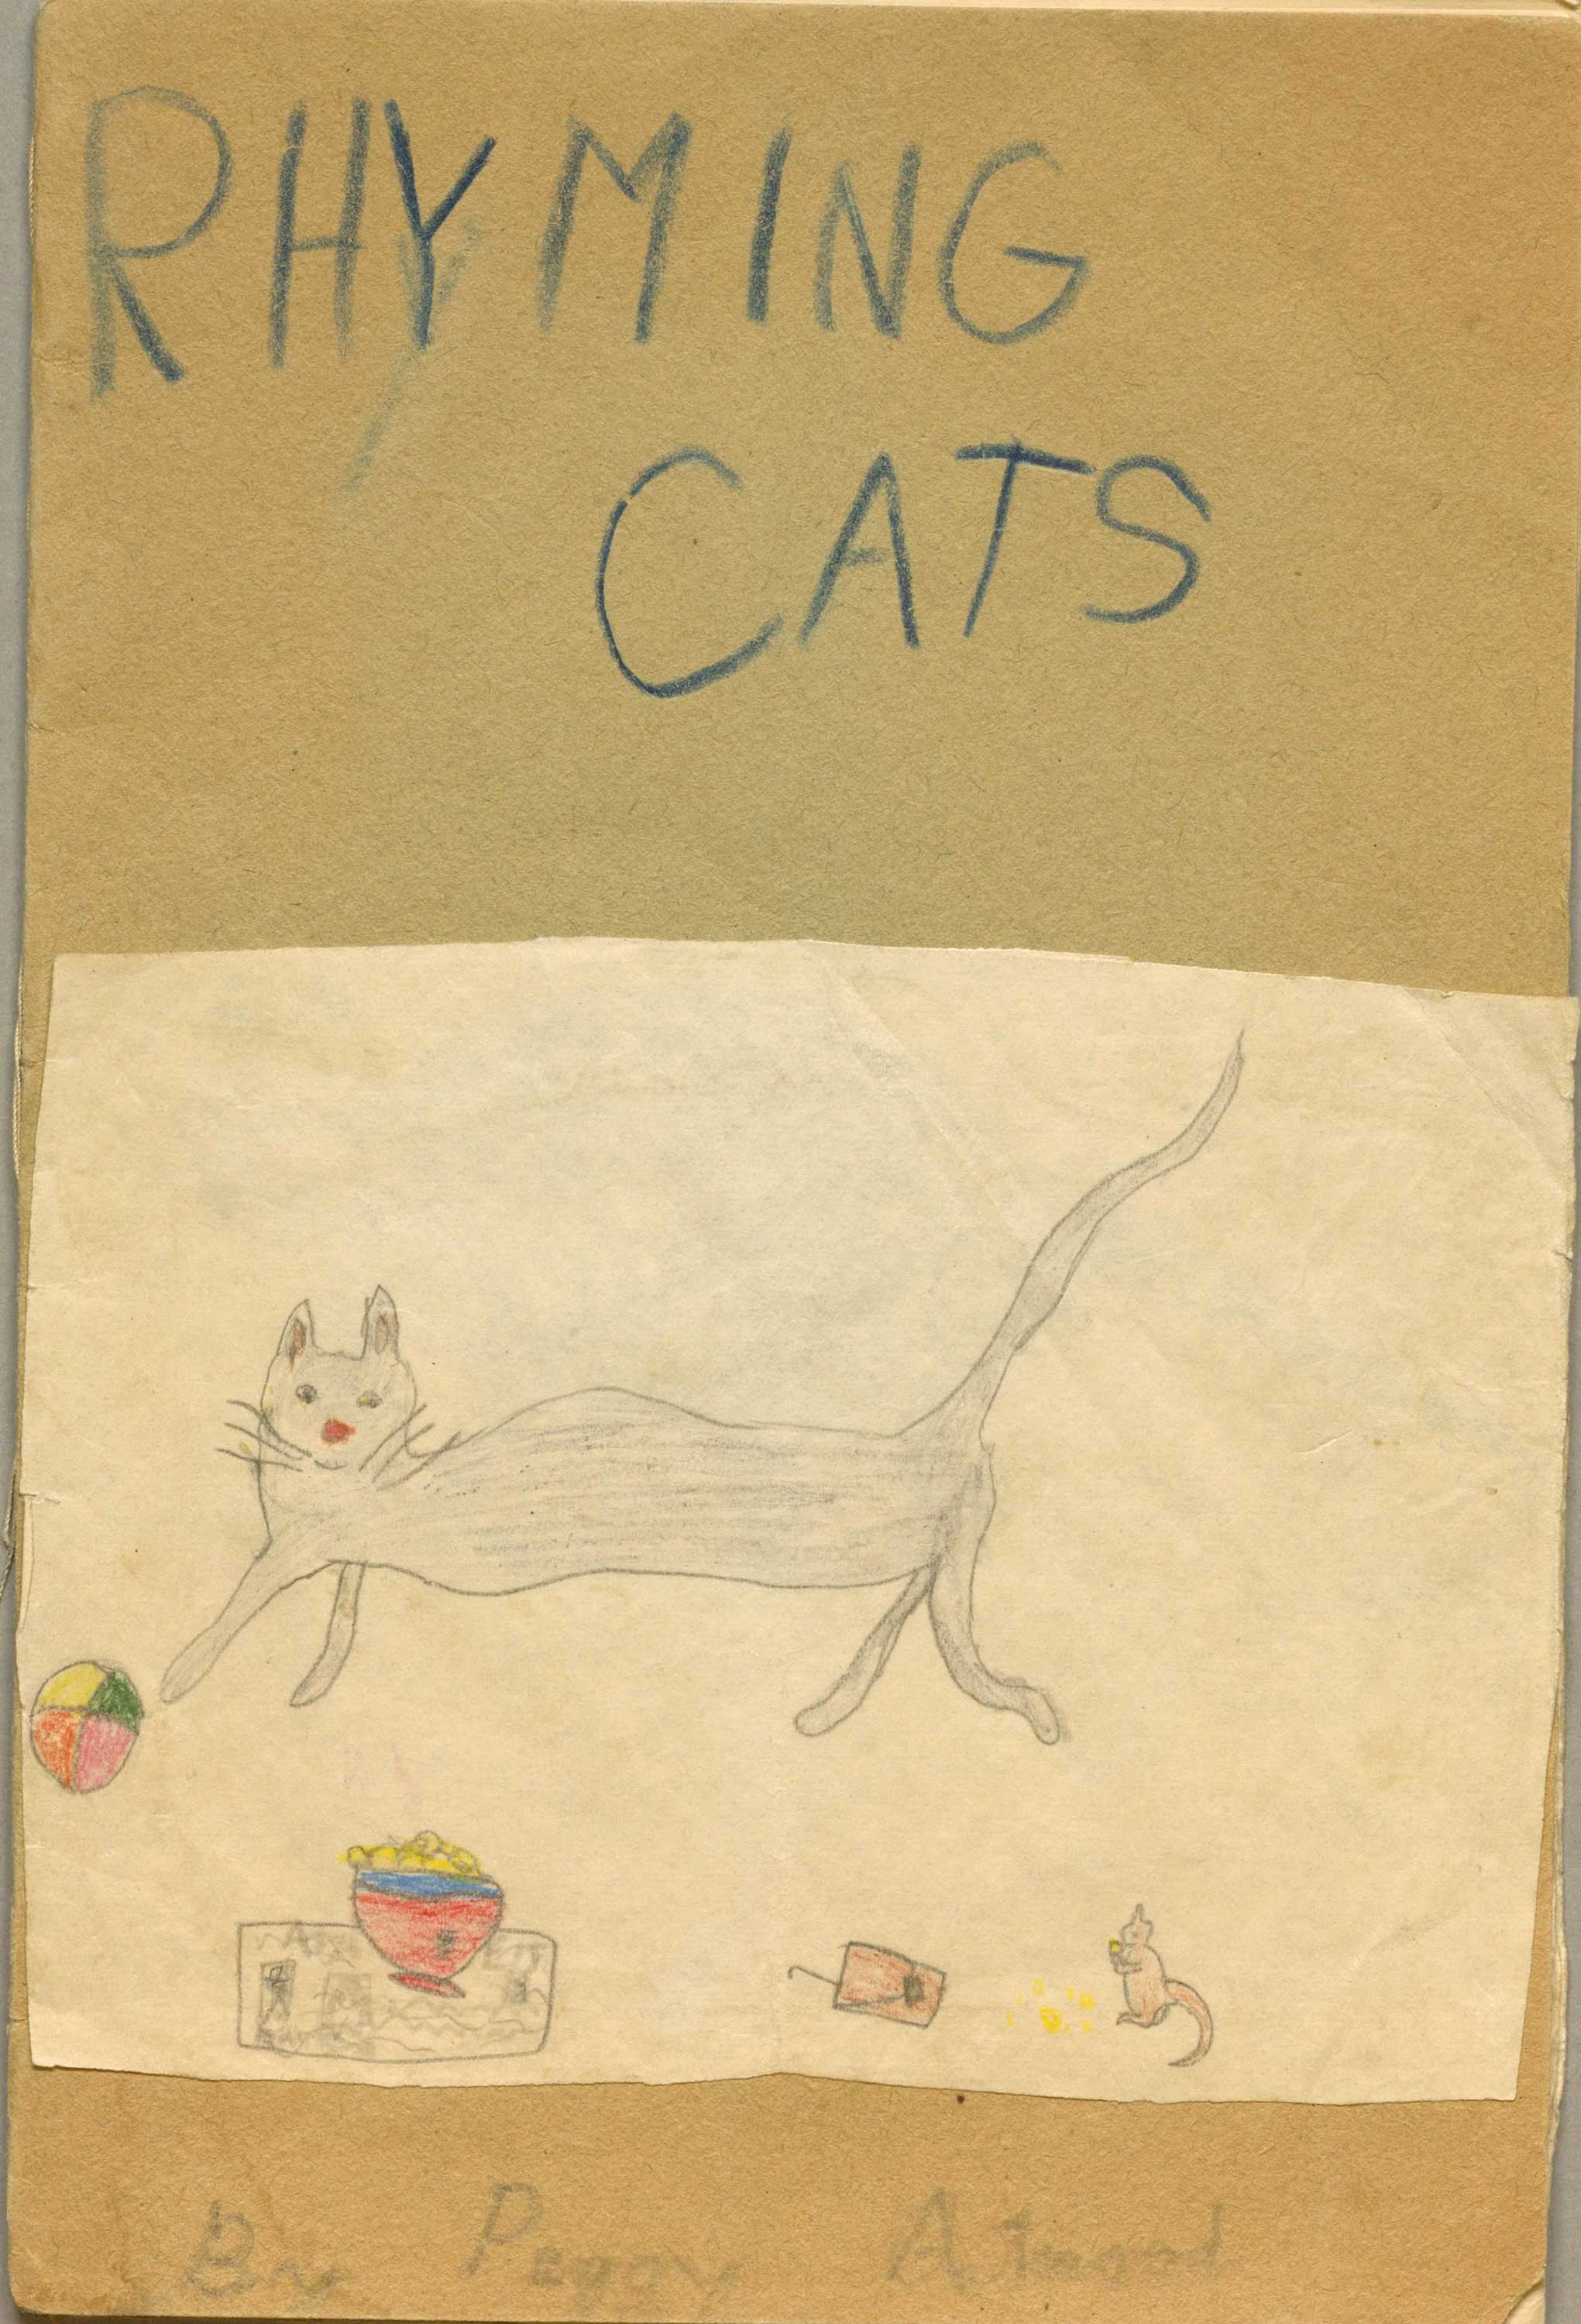 Front Cover of Atwood Juvenilia "Rhyming Cats"